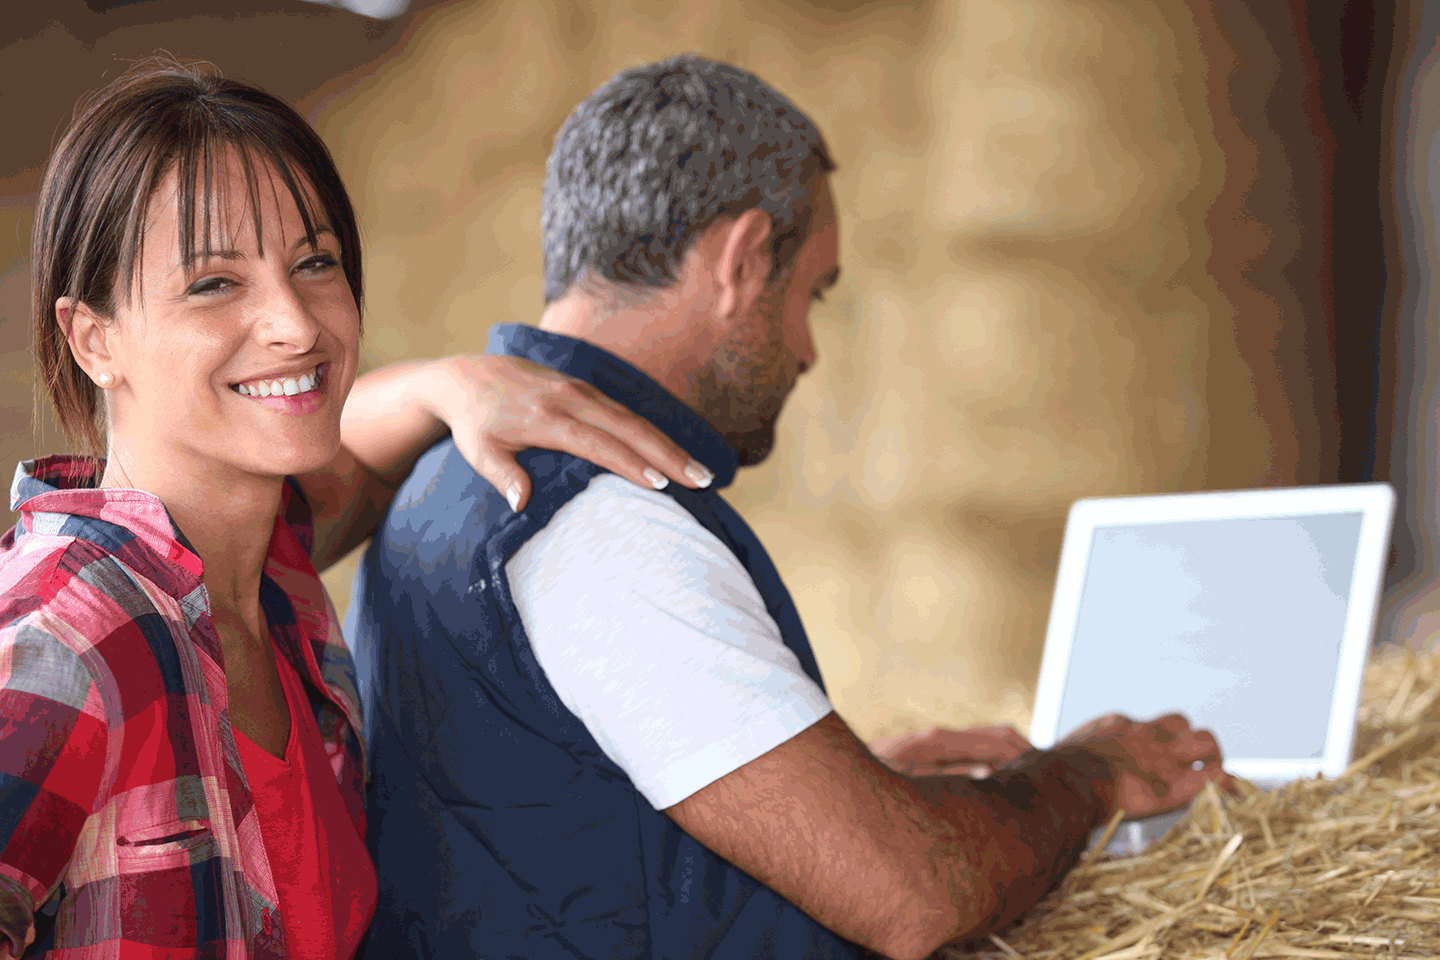 man and woman on computer surrounded by hay